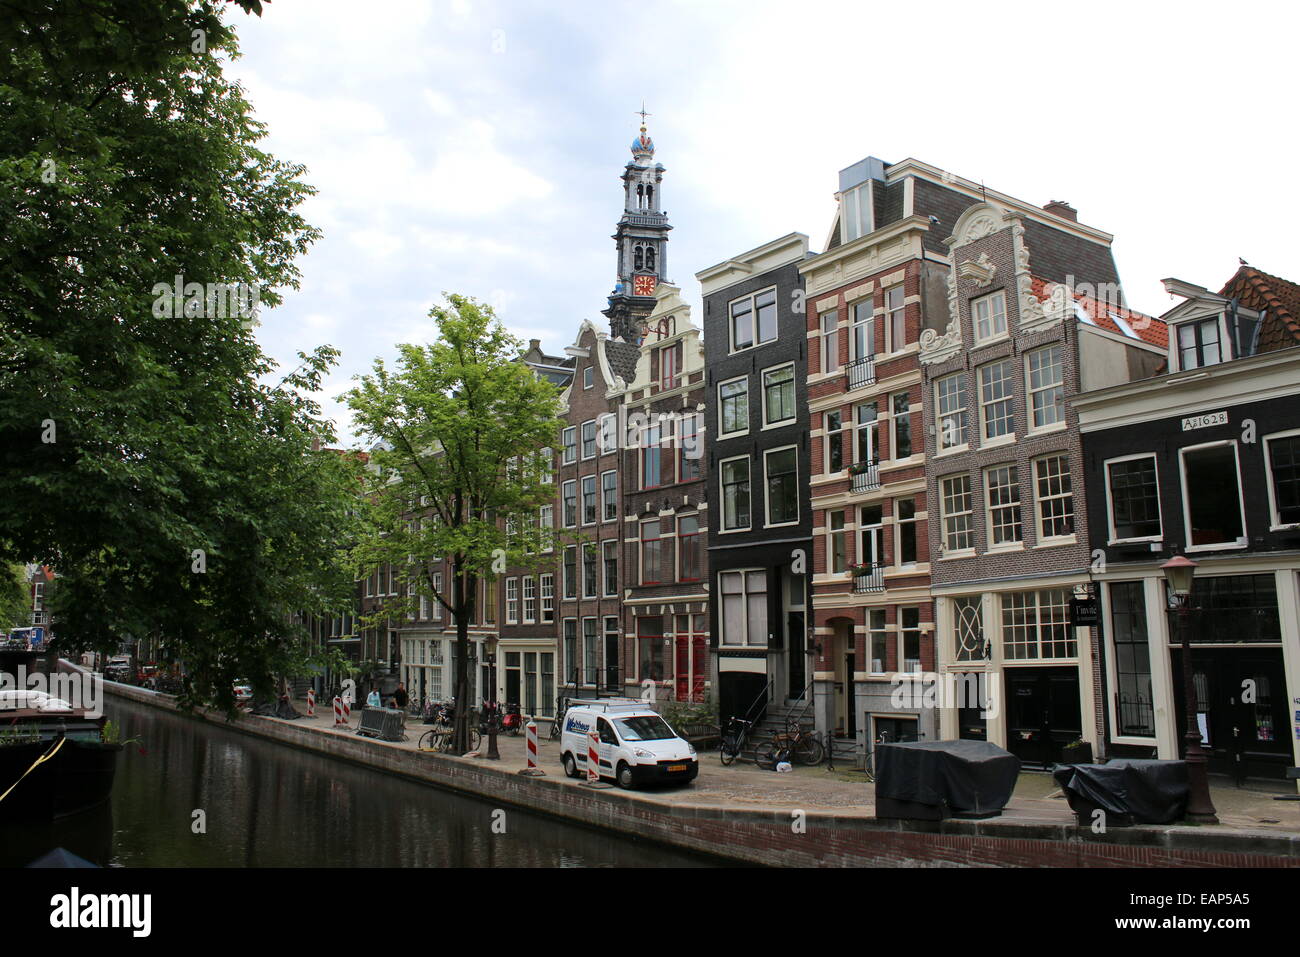 Old warehouses and mansions at Bloemgracht canal near Westerkerk in the Jordaan area of the Dutch capital Amsterdam Stock Photo